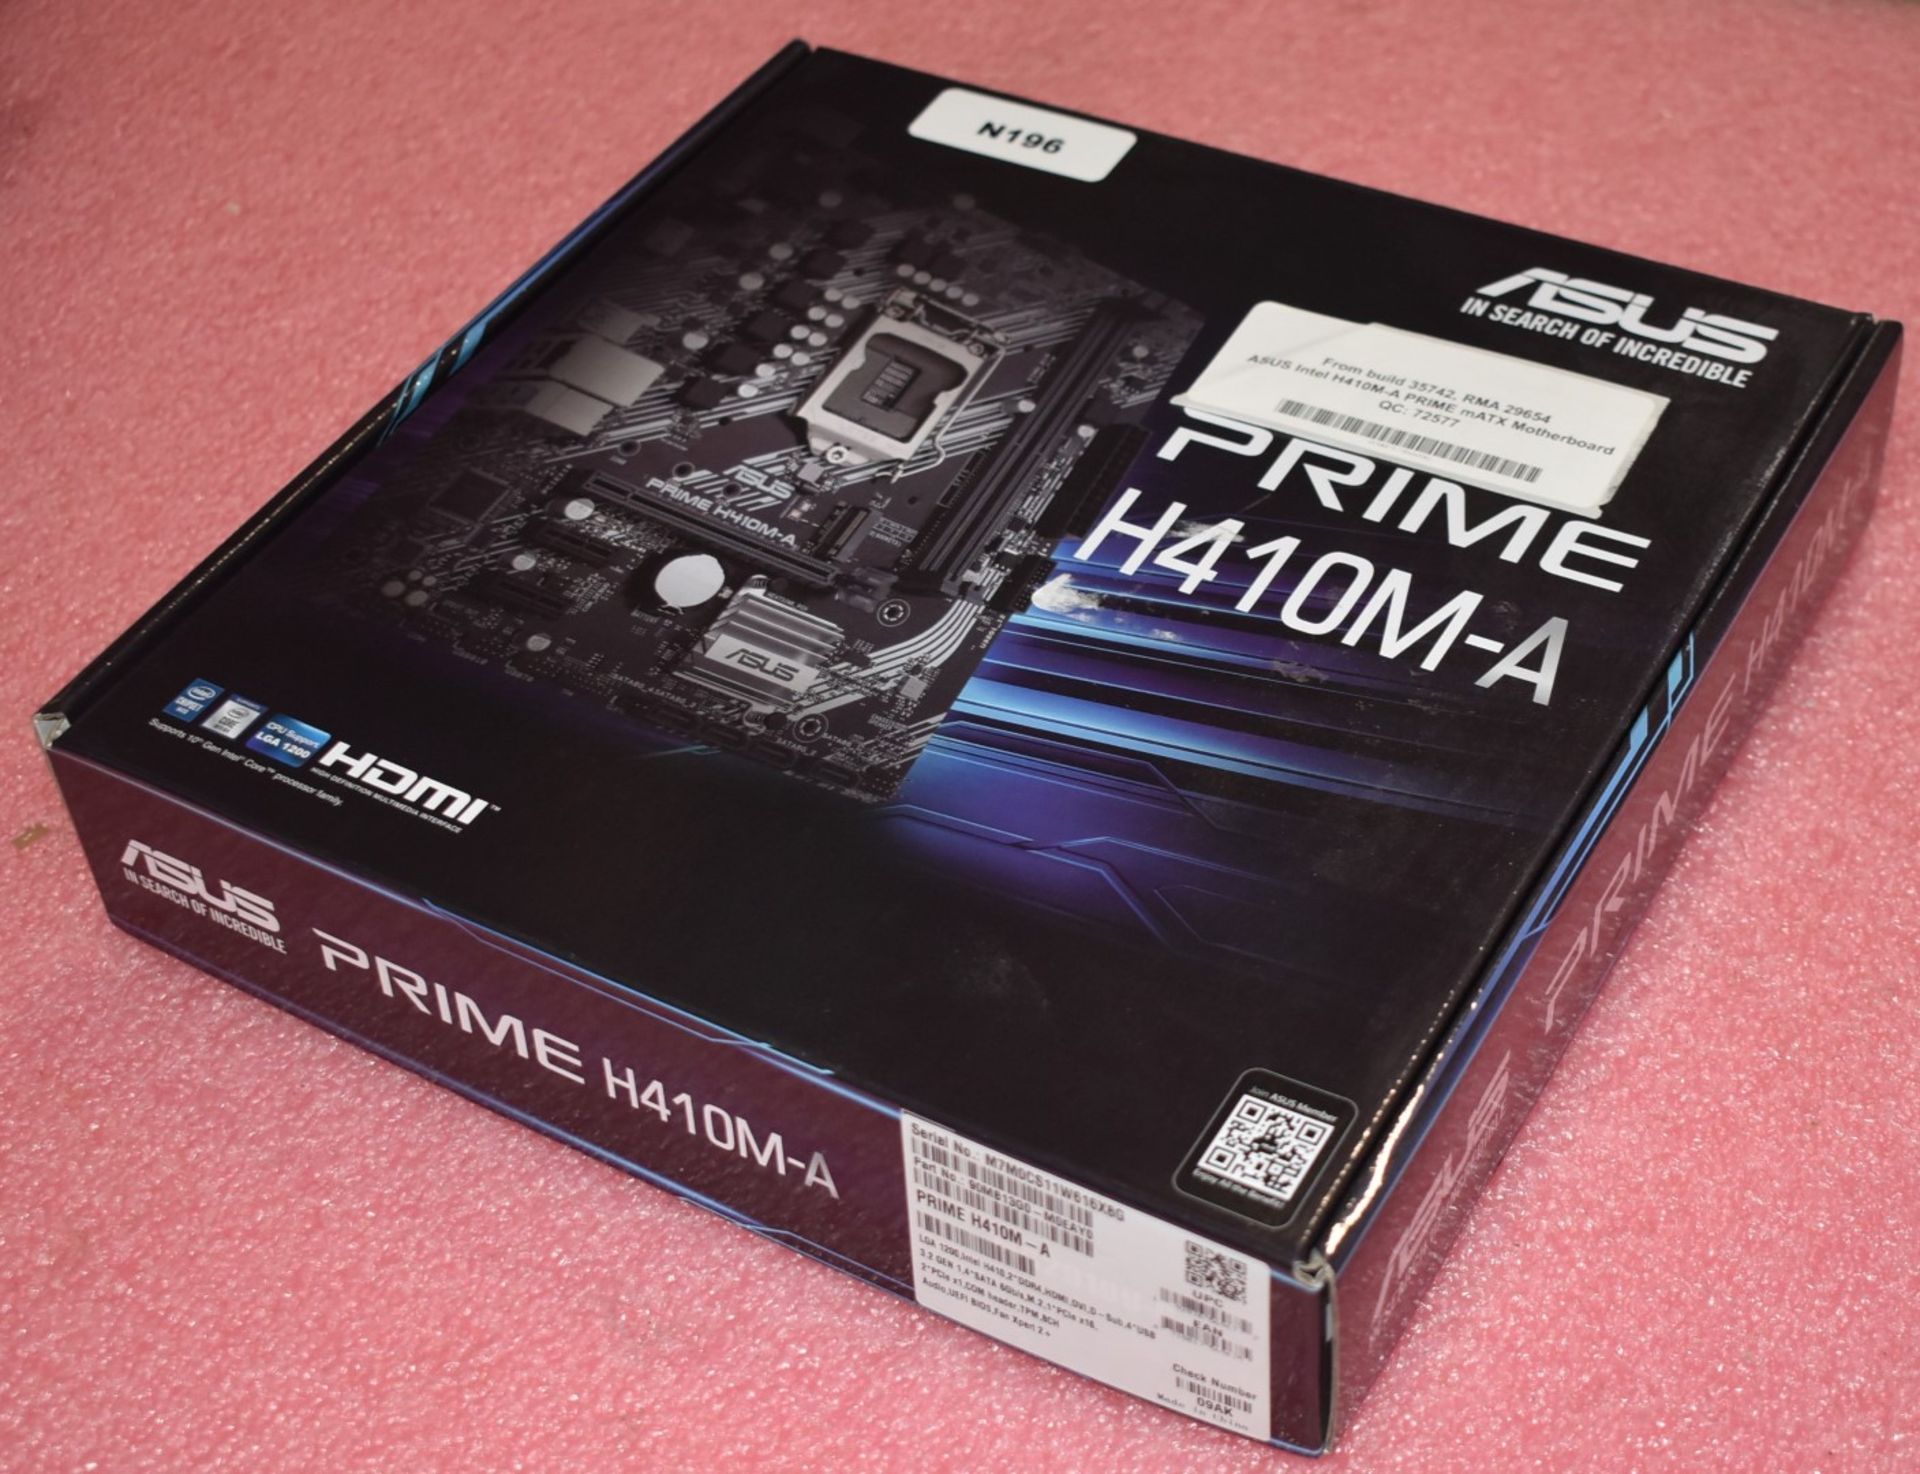 1 x Asus Prime H410M-E Intel LGA1200 Motherboard - Boxed With Accessories - Image 3 of 8